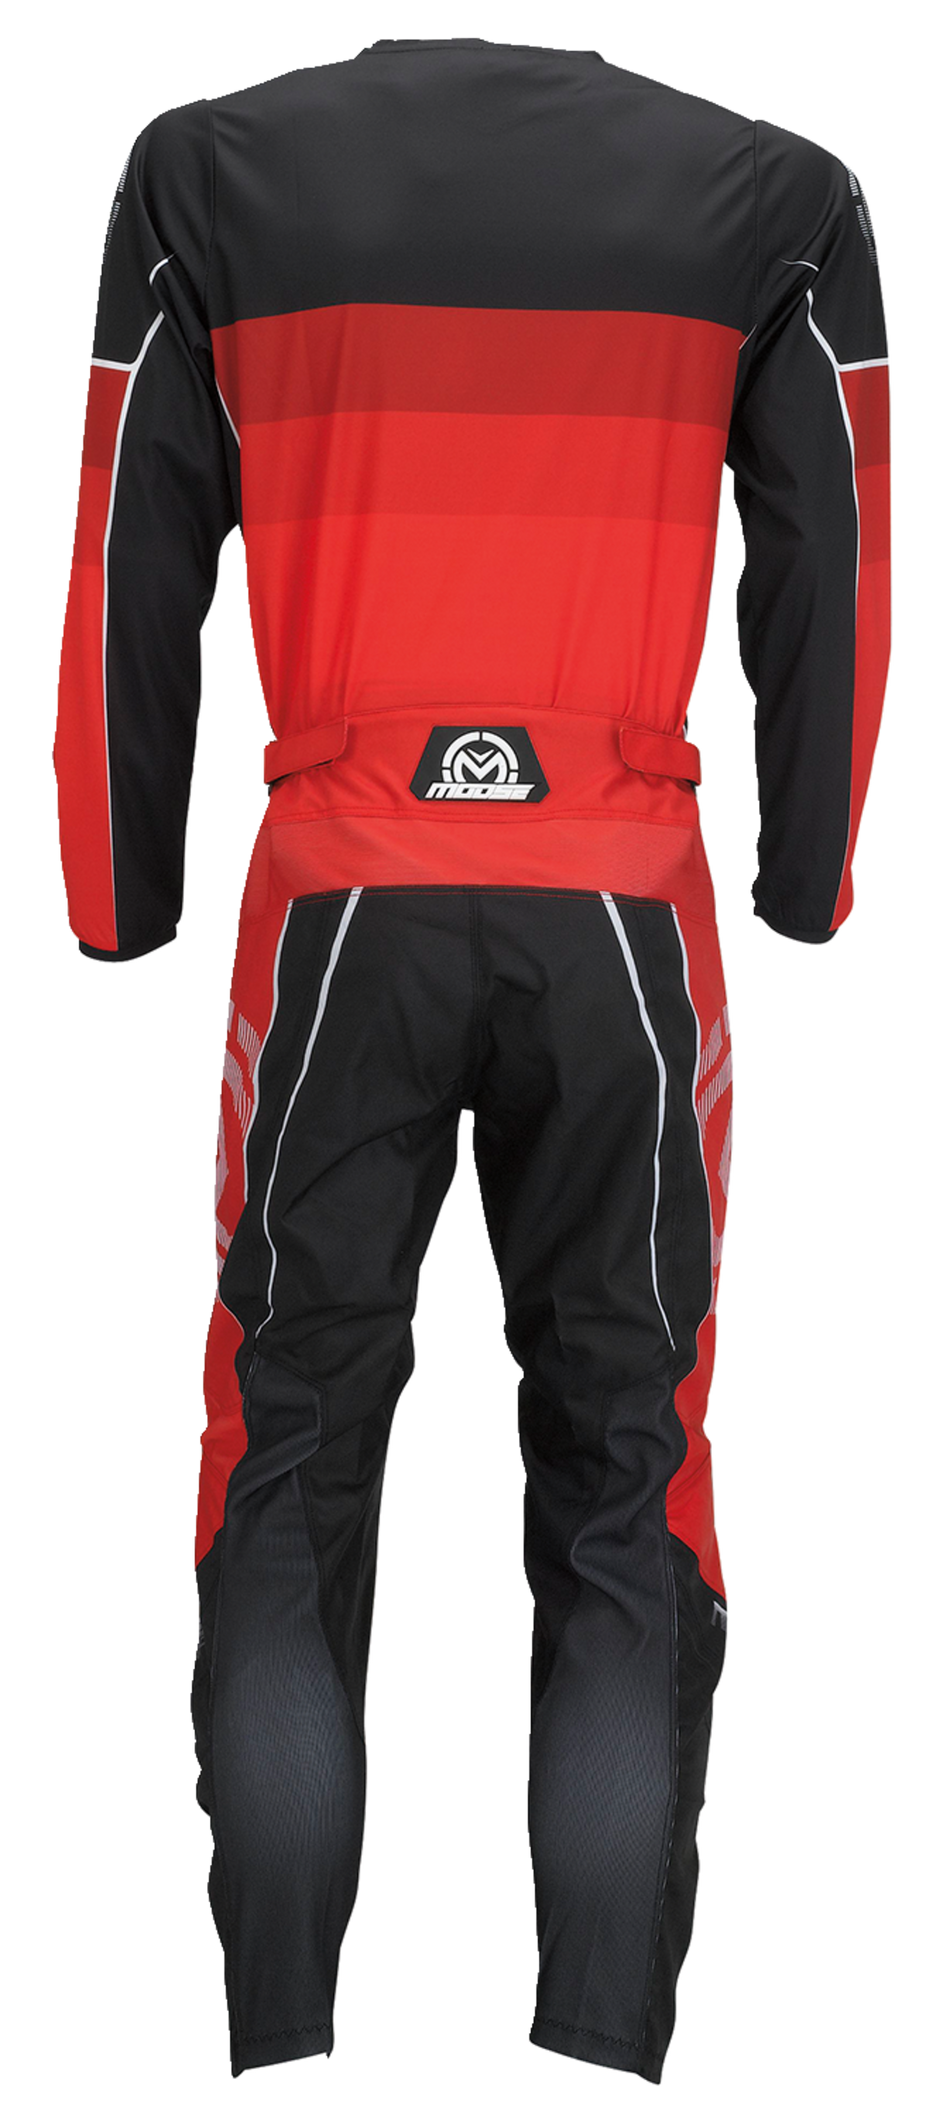 MOOSE RACING Qualifier® Jersey - Red/Black - Small 2910-7180